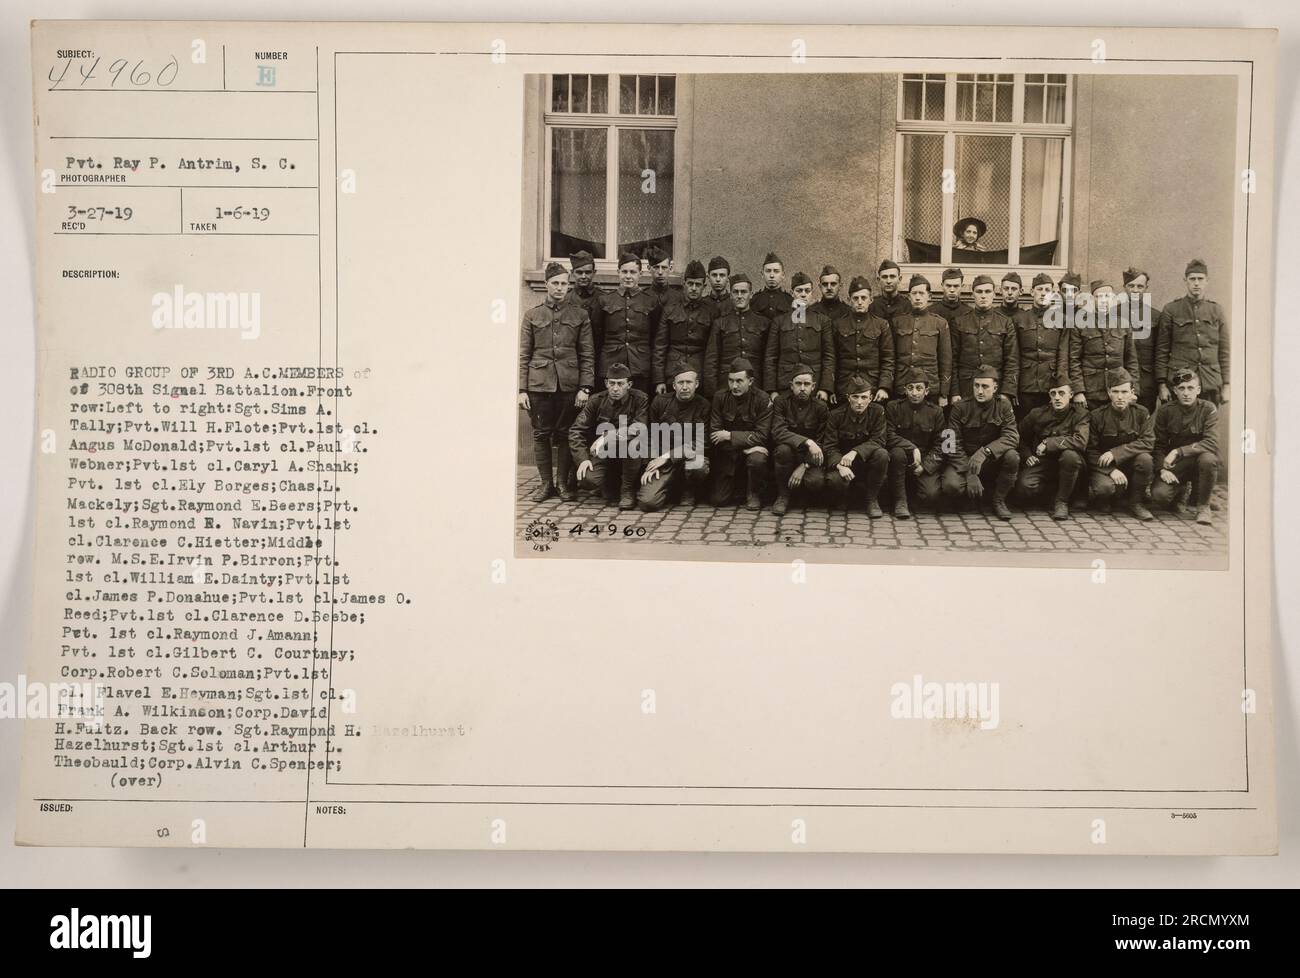 Members of the 308th Signal Battalion pose for a group photo. Taken on January 6, 1919, the image includes various ranks and names of the soldiers. Front row (left to right): Sgt. Sims A. Tally, Pvt. Will H. Flote, Pvt. 1st Cl. Angus McDonald, Pvt. 1st Cl. Paul K. Webner, Pvt. 1st Cl. Caryl A. Shank, Pvt. 1st Cl. Ely Borges, Chas. L. Mackely, Sgt. Raymond E. Beers, Pvt. 1st Cl. Raymond R. Navin, Pvt. 1st Cl. Clarence C. Hietter. Middle row: M.S.E. Irvin P. Birron, Pvt. 1st Cl. William E. Dainty, Pvt. 1st Cl. James P. Donahue, Pvt. 1st Cl. James O. Reed, Pvt. 1st Cl. Clarence D. Bebbe, Pvt. 1st Stock Photo